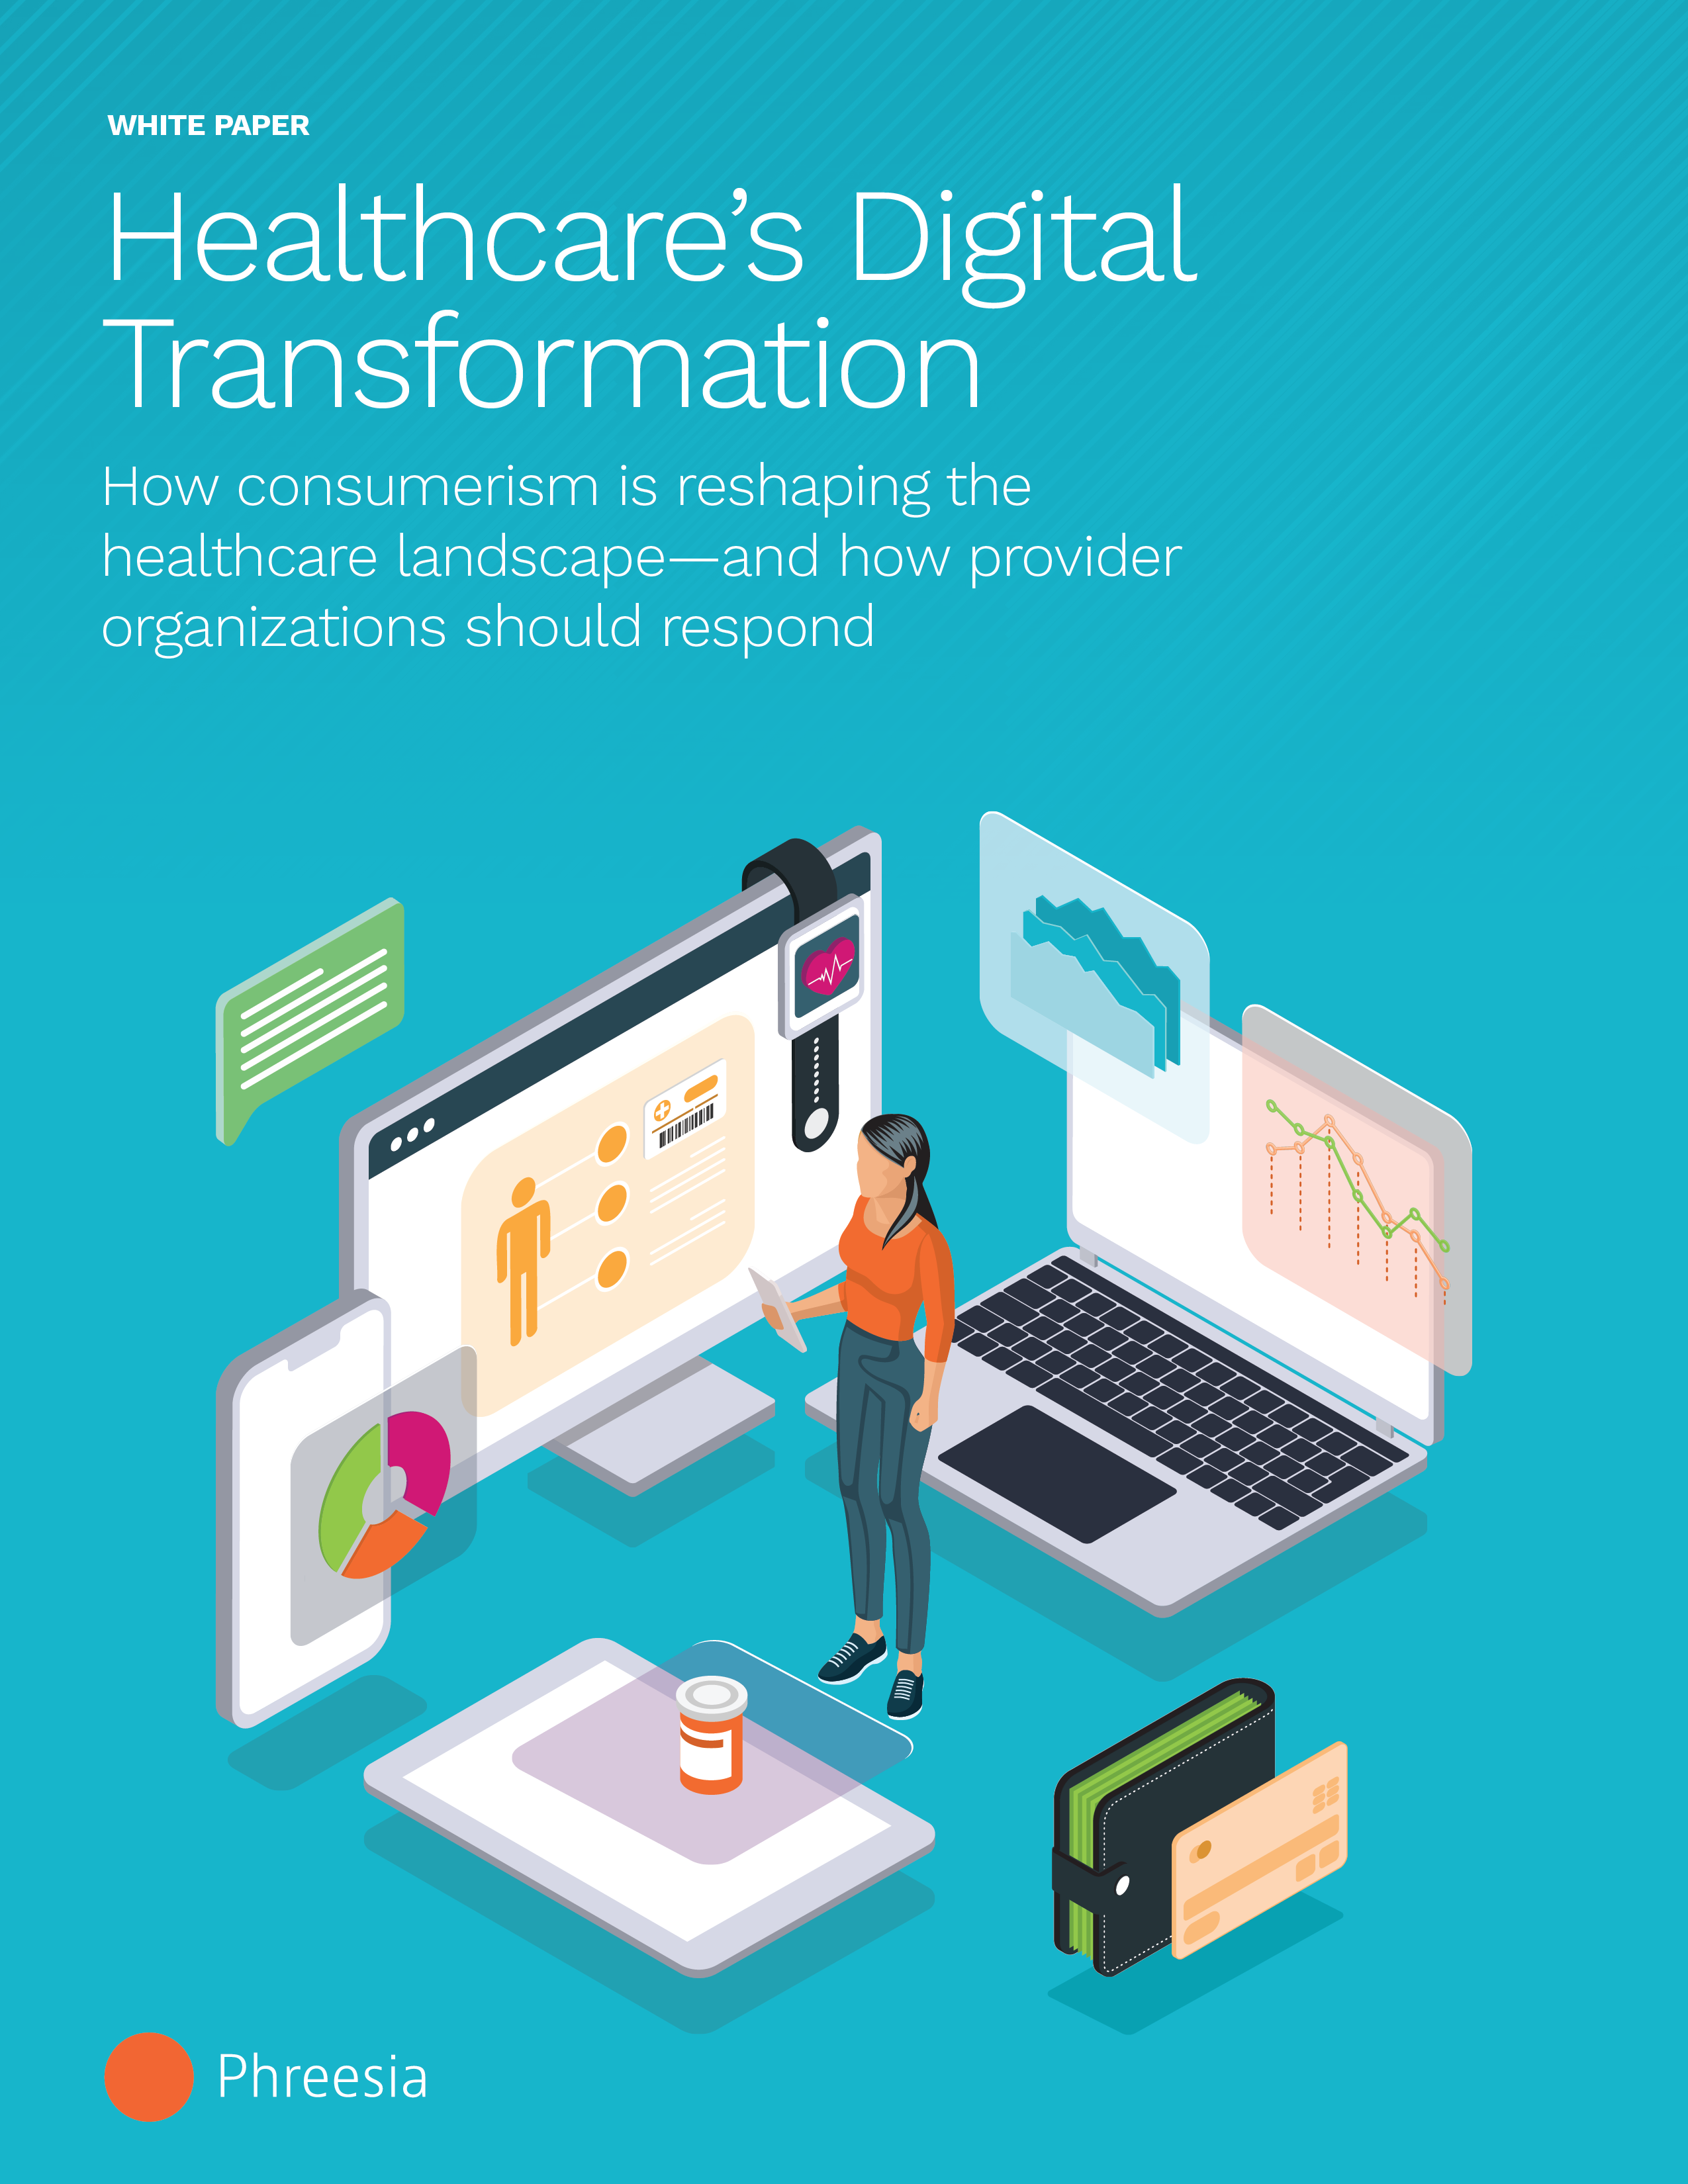 Healthcare’s Digital Transformation: How Consumerism is Reshaping the Healthcare Landscape